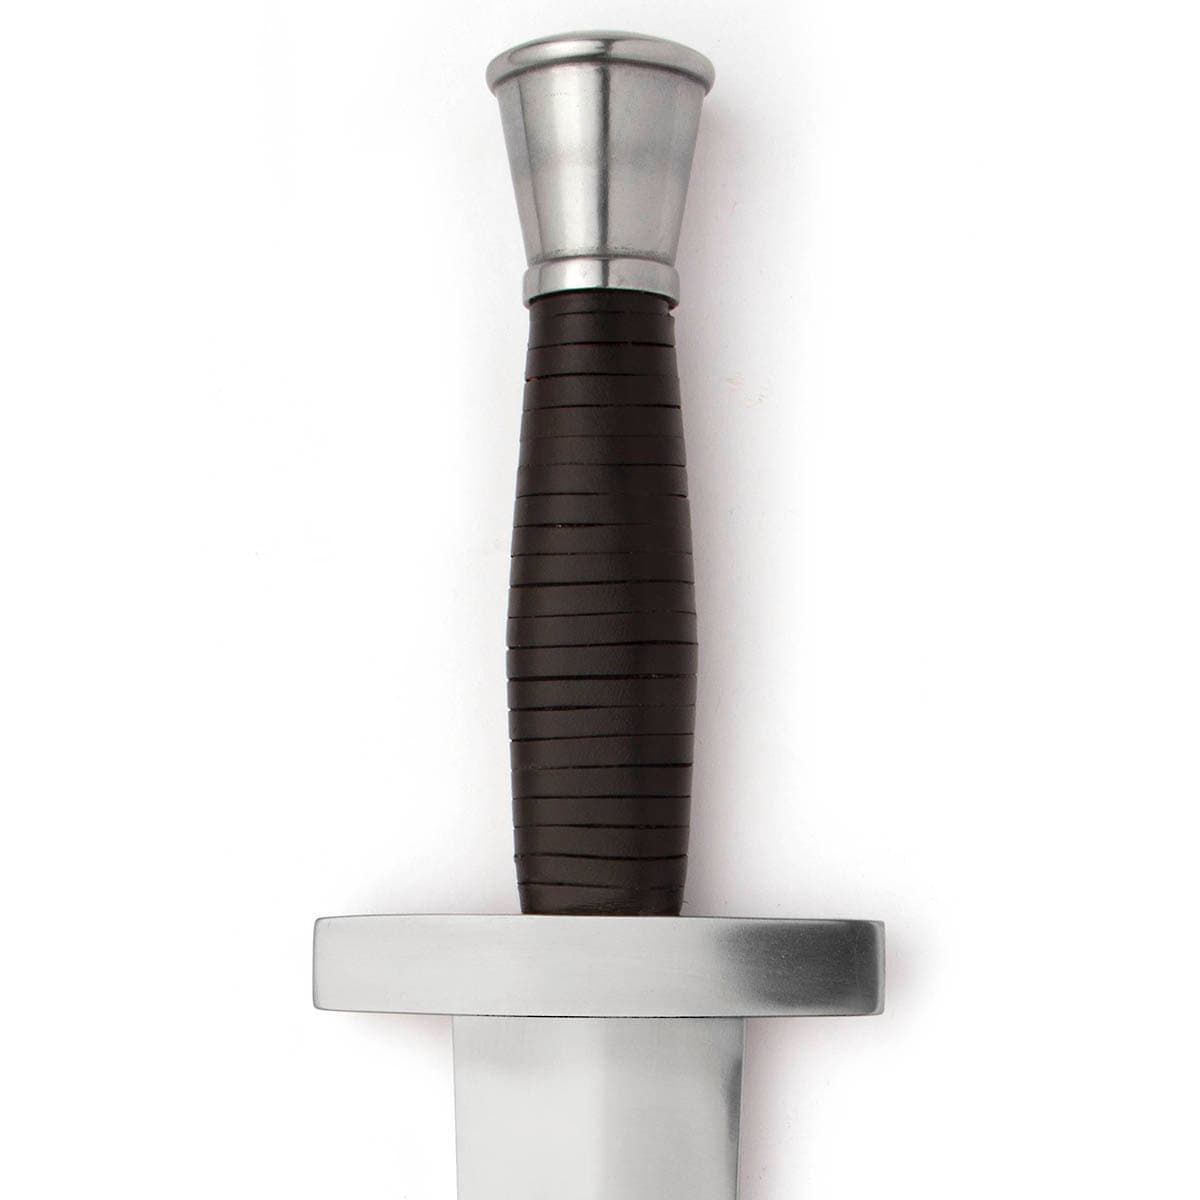 Hoplite replica sword by Windlass has leather-covered wood grip and steel guard and pommel